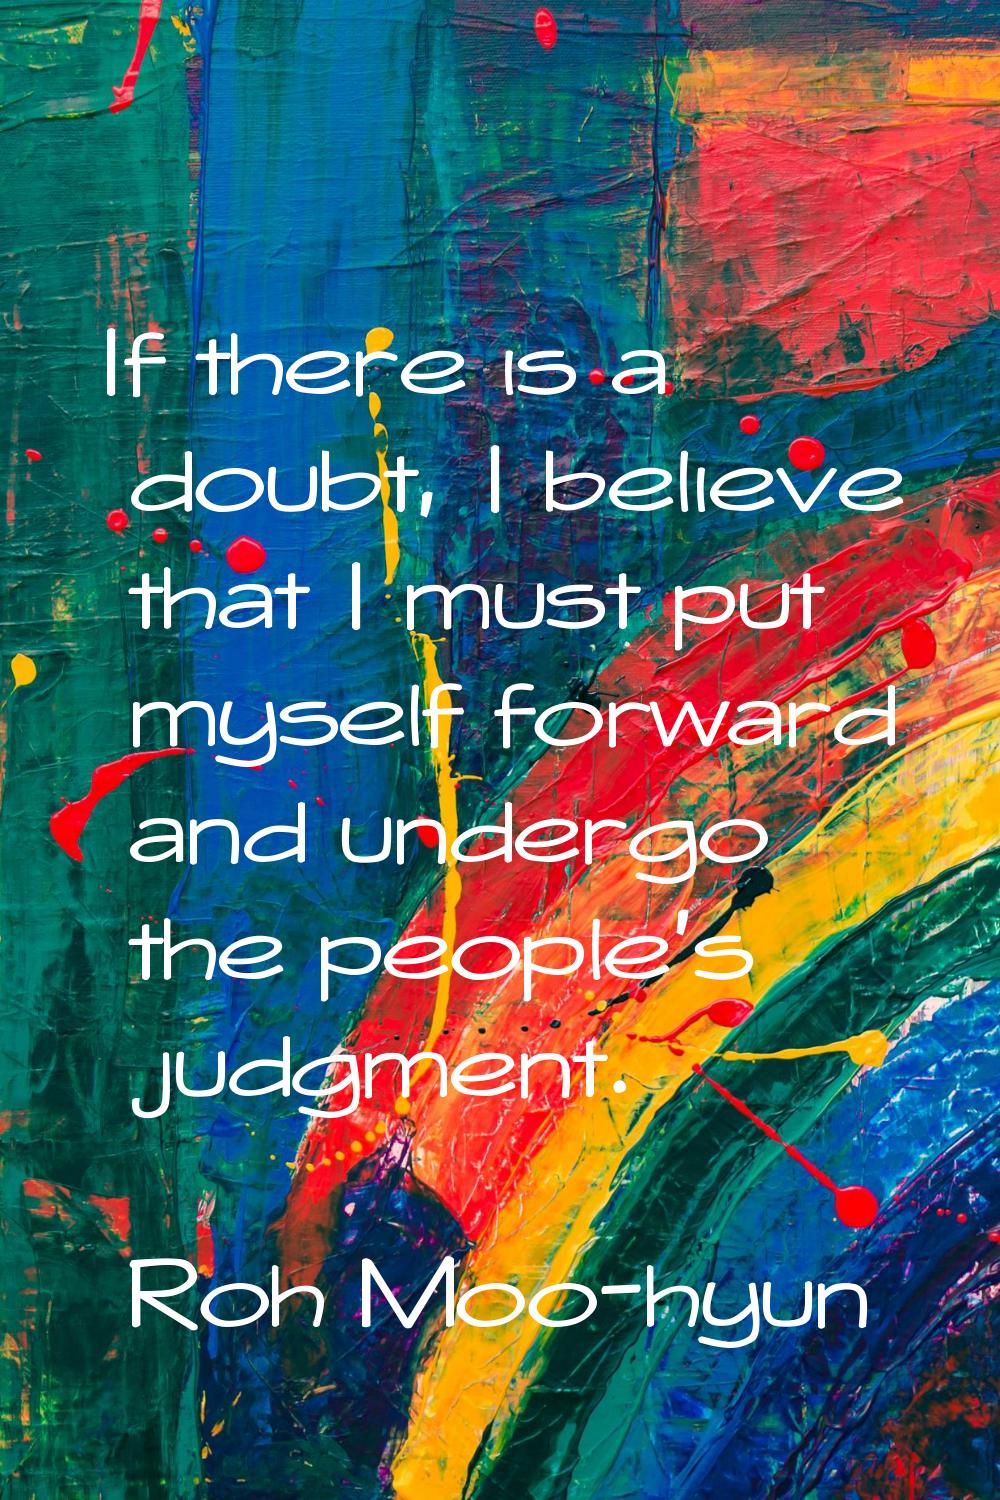 If there is a doubt, I believe that I must put myself forward and undergo the people's judgment.